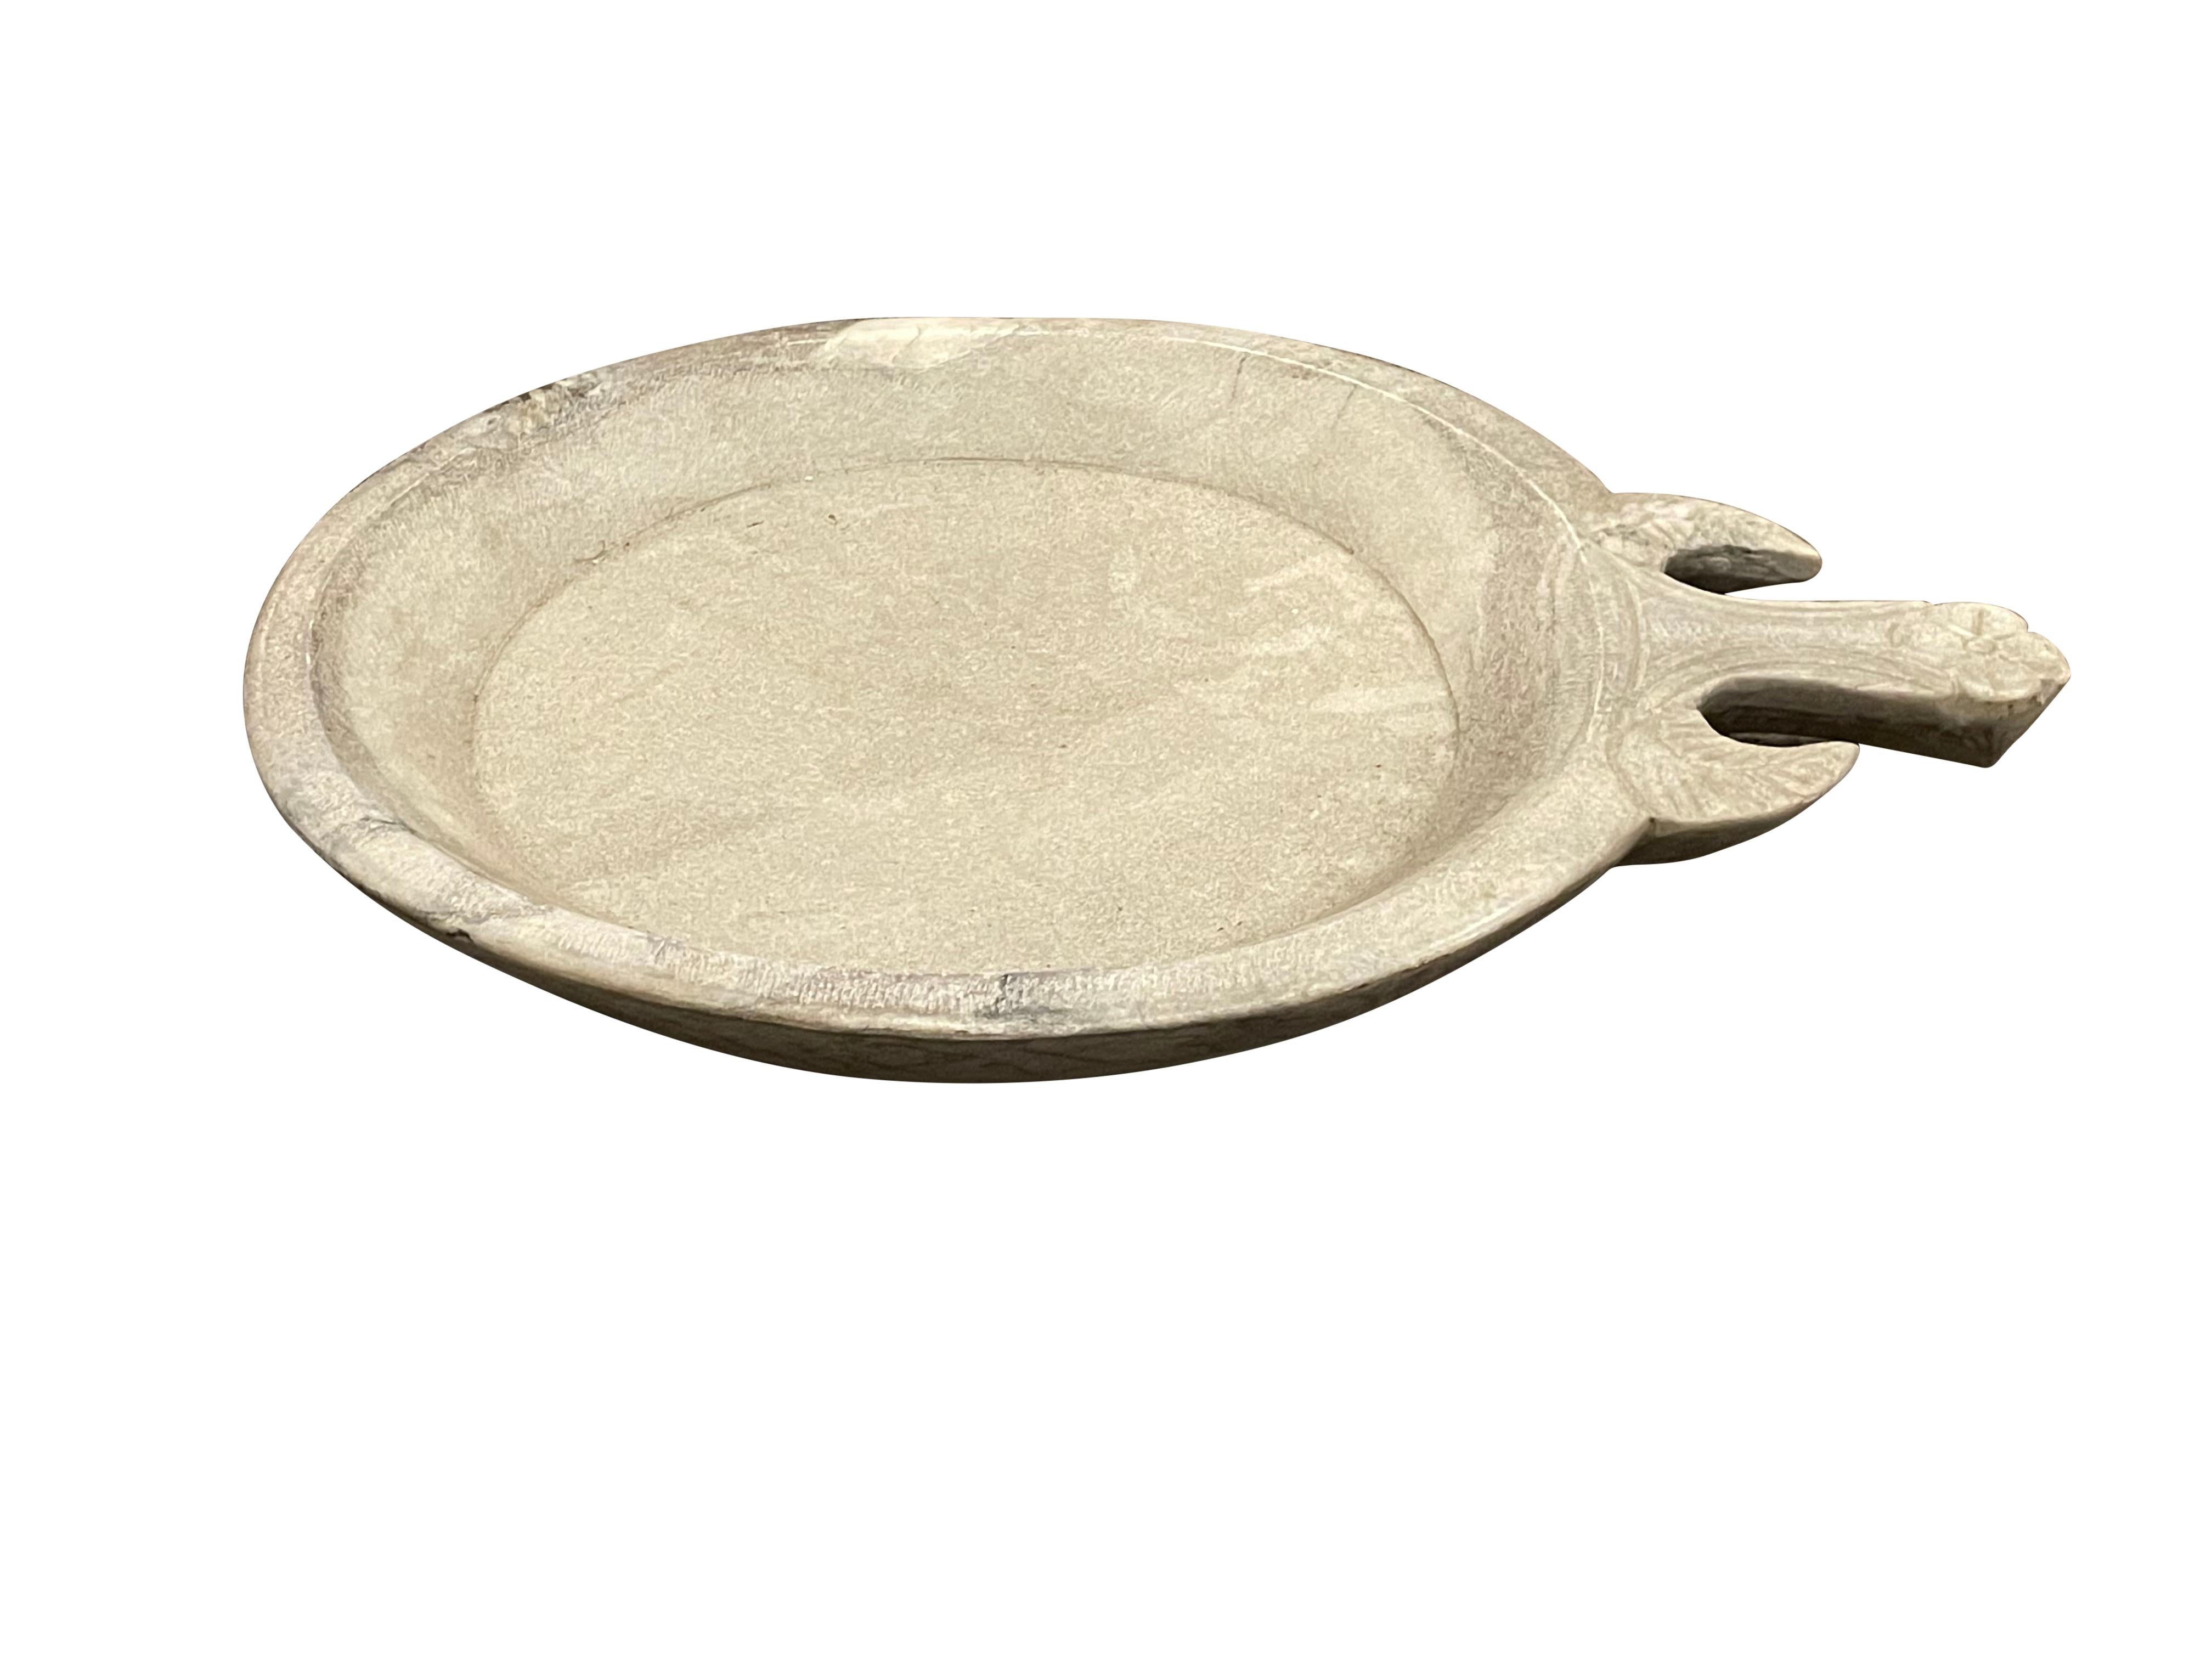 19th century Indian marble food offering tray.
Classic shape and design.